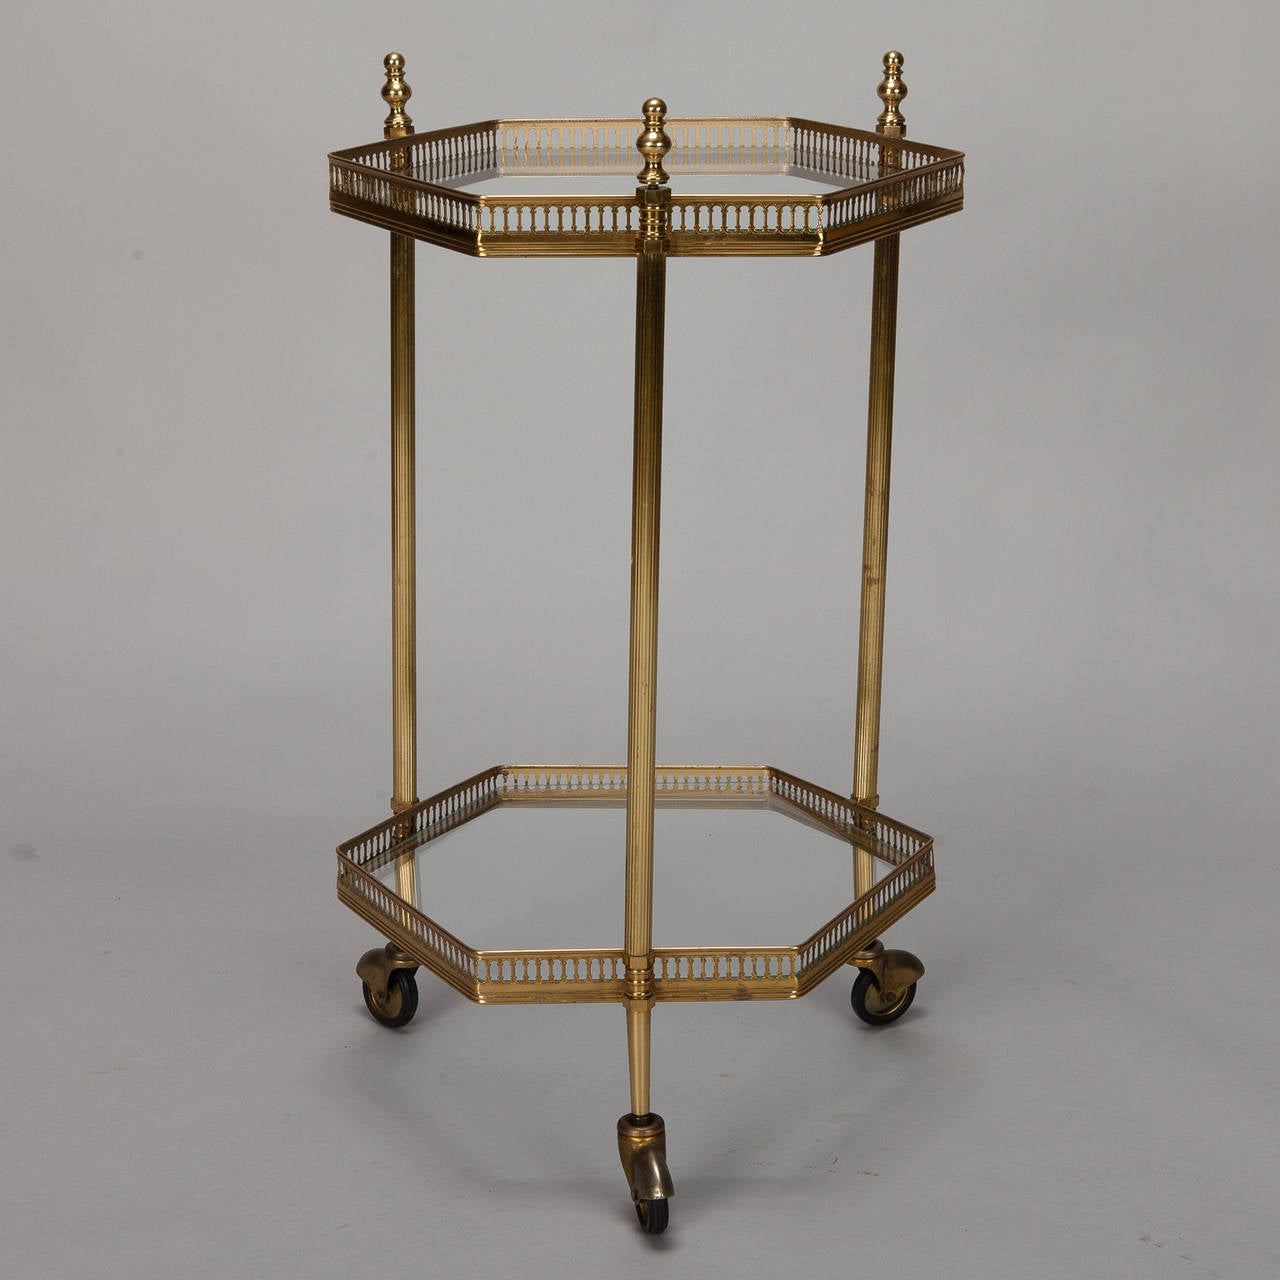 Circa 1960s French brass and glass drinks / serving trolley table has two tiers of six sided glass table tops with open works brass gallery, decorative brass finials topping the three supports and original wheels.